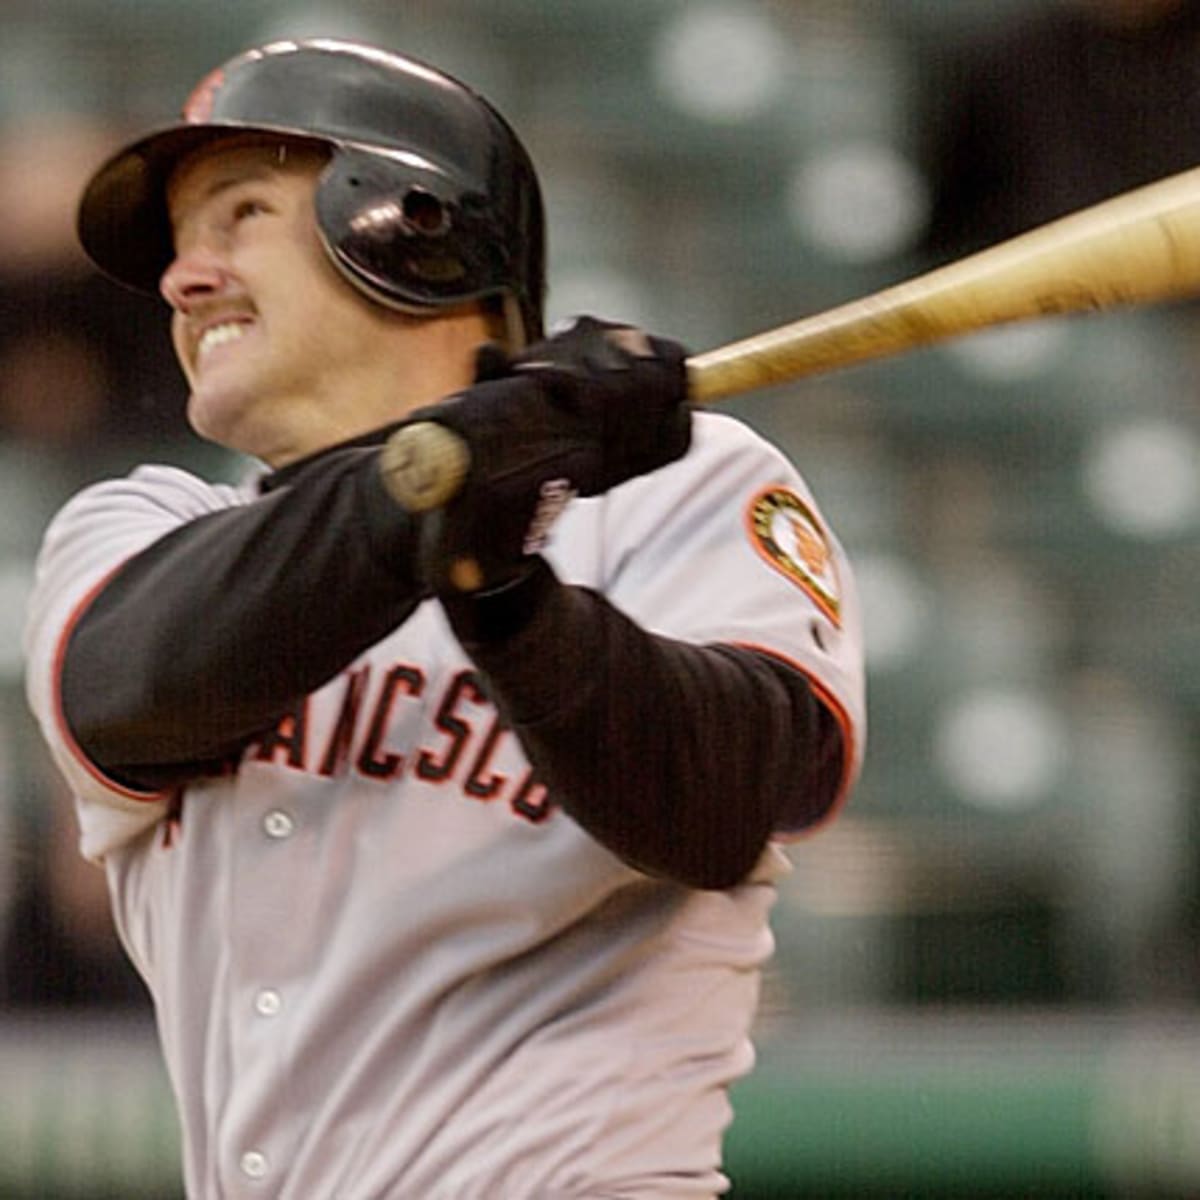 Jaws And The 14 Hall Of Fame Ballot Jeff Kent Sports Illustrated